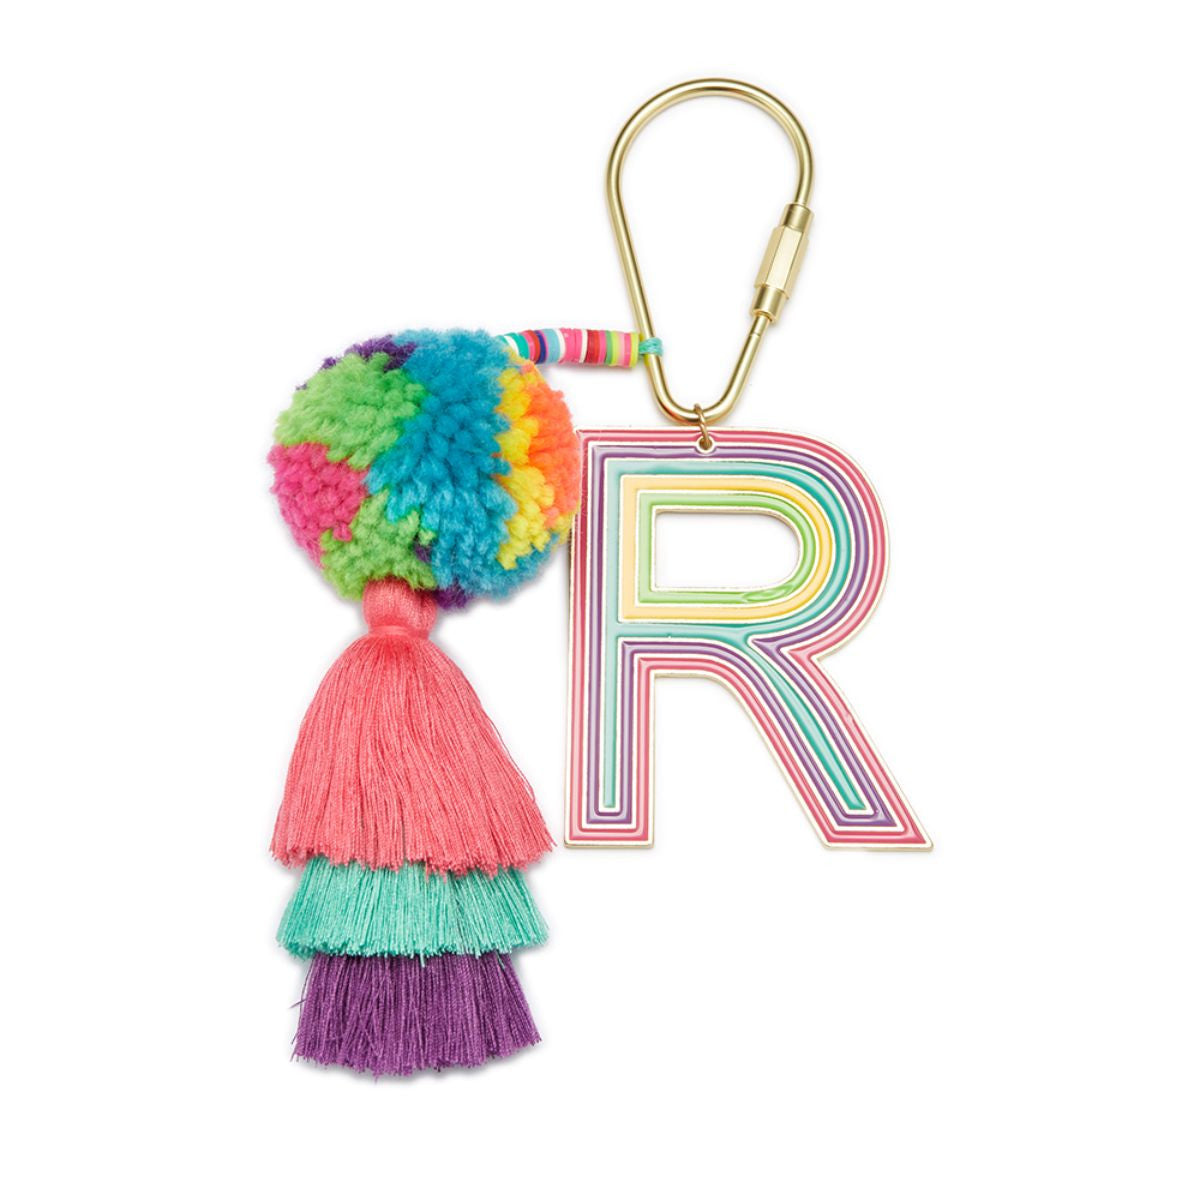 Initial keychain with tassel, Personalized Rainbow letter keychain -  personalized gift, bridesmaid gifts, clear monogram keychain